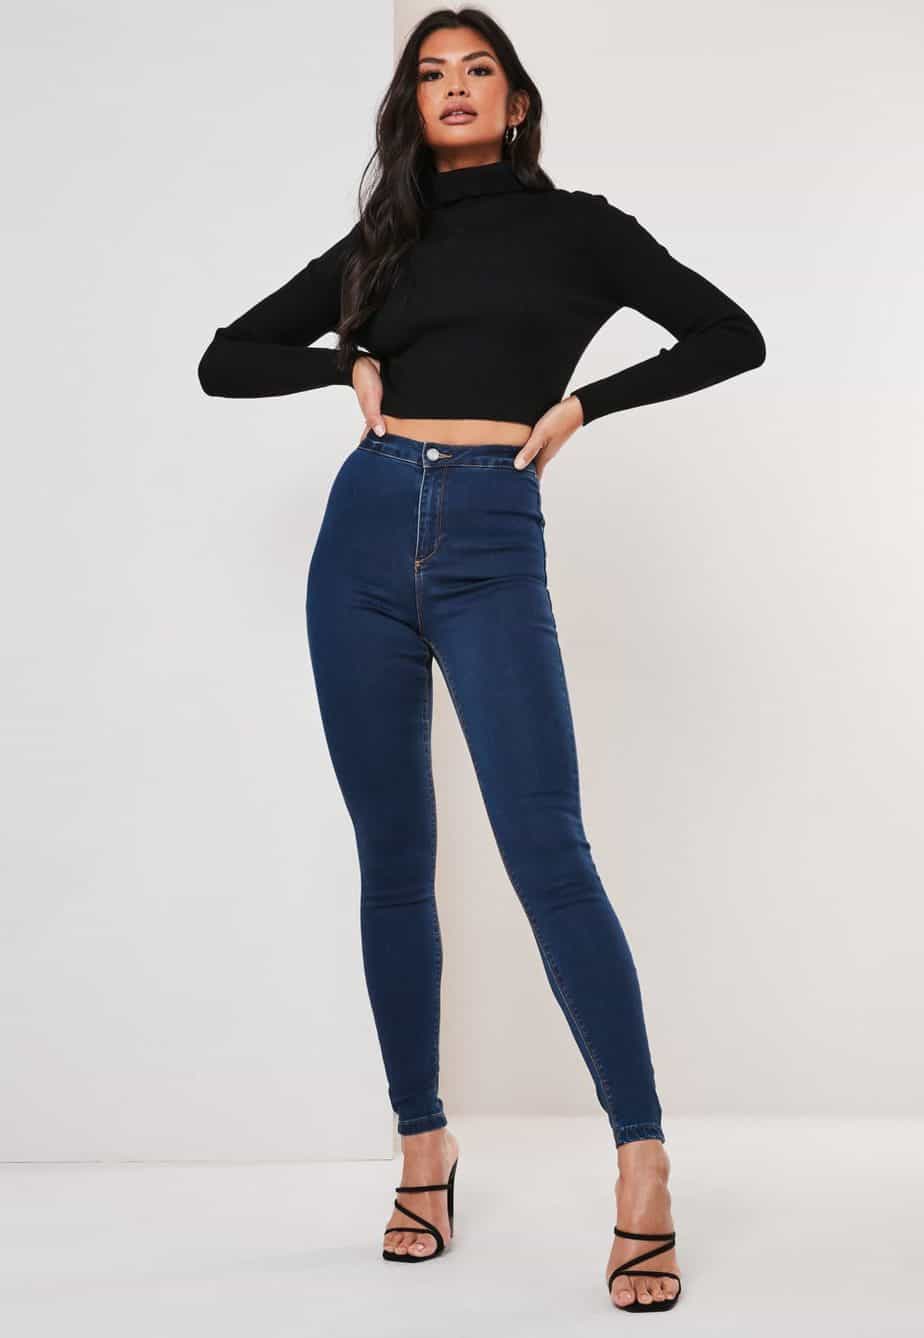 Best 8 Ideas for Women's Jeans 2023 Trends and Tendencies Fashion